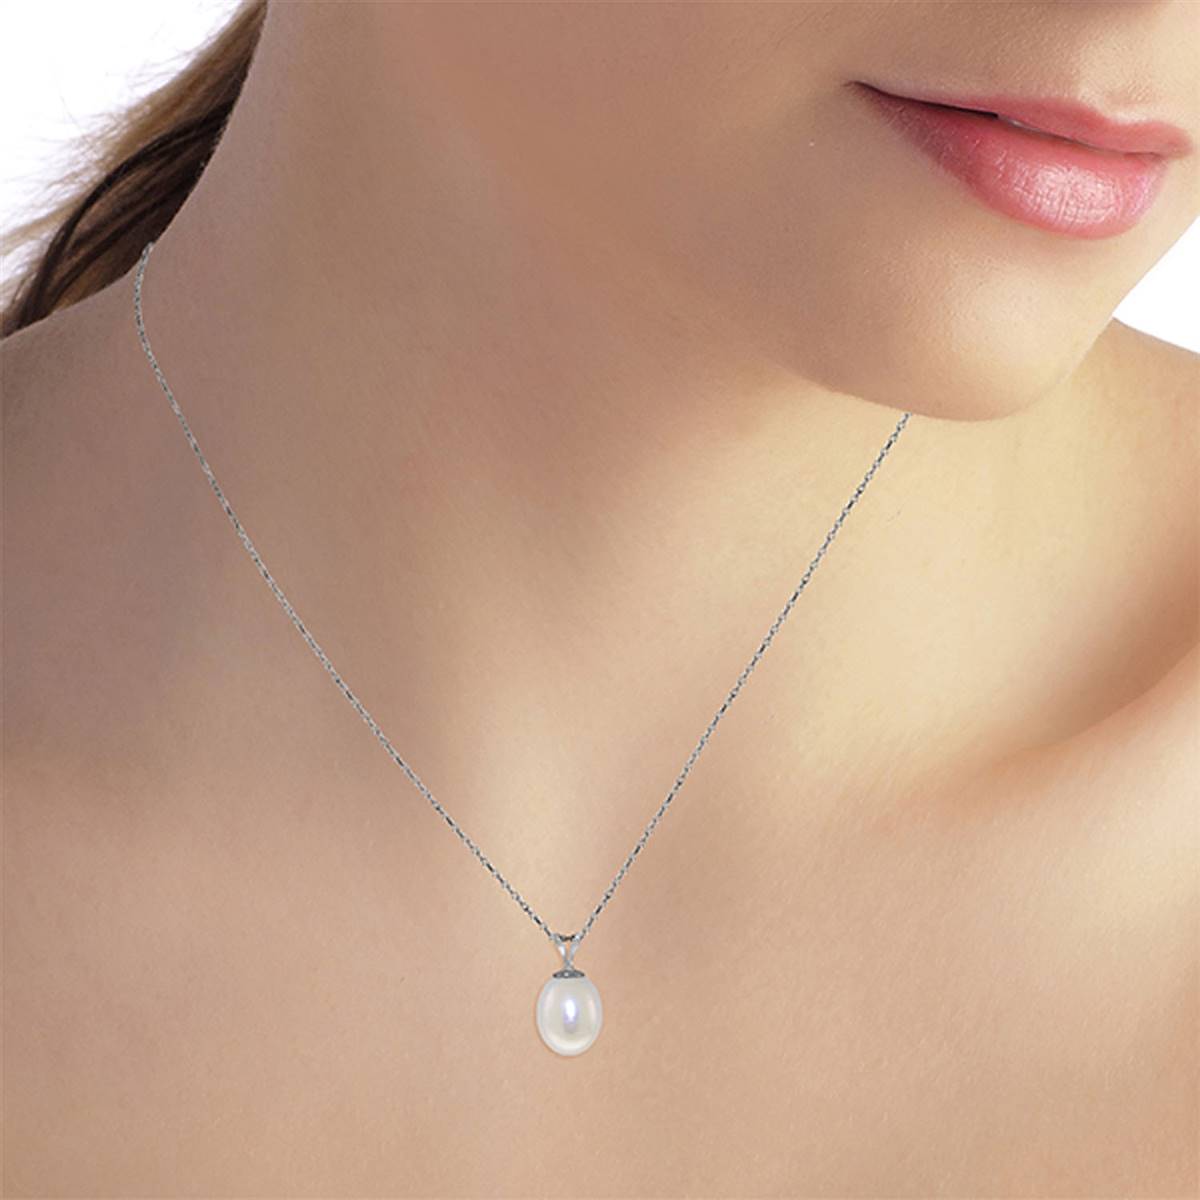 4 Carat 14K Solid White Gold Perseverance Pays Pearl Necklace